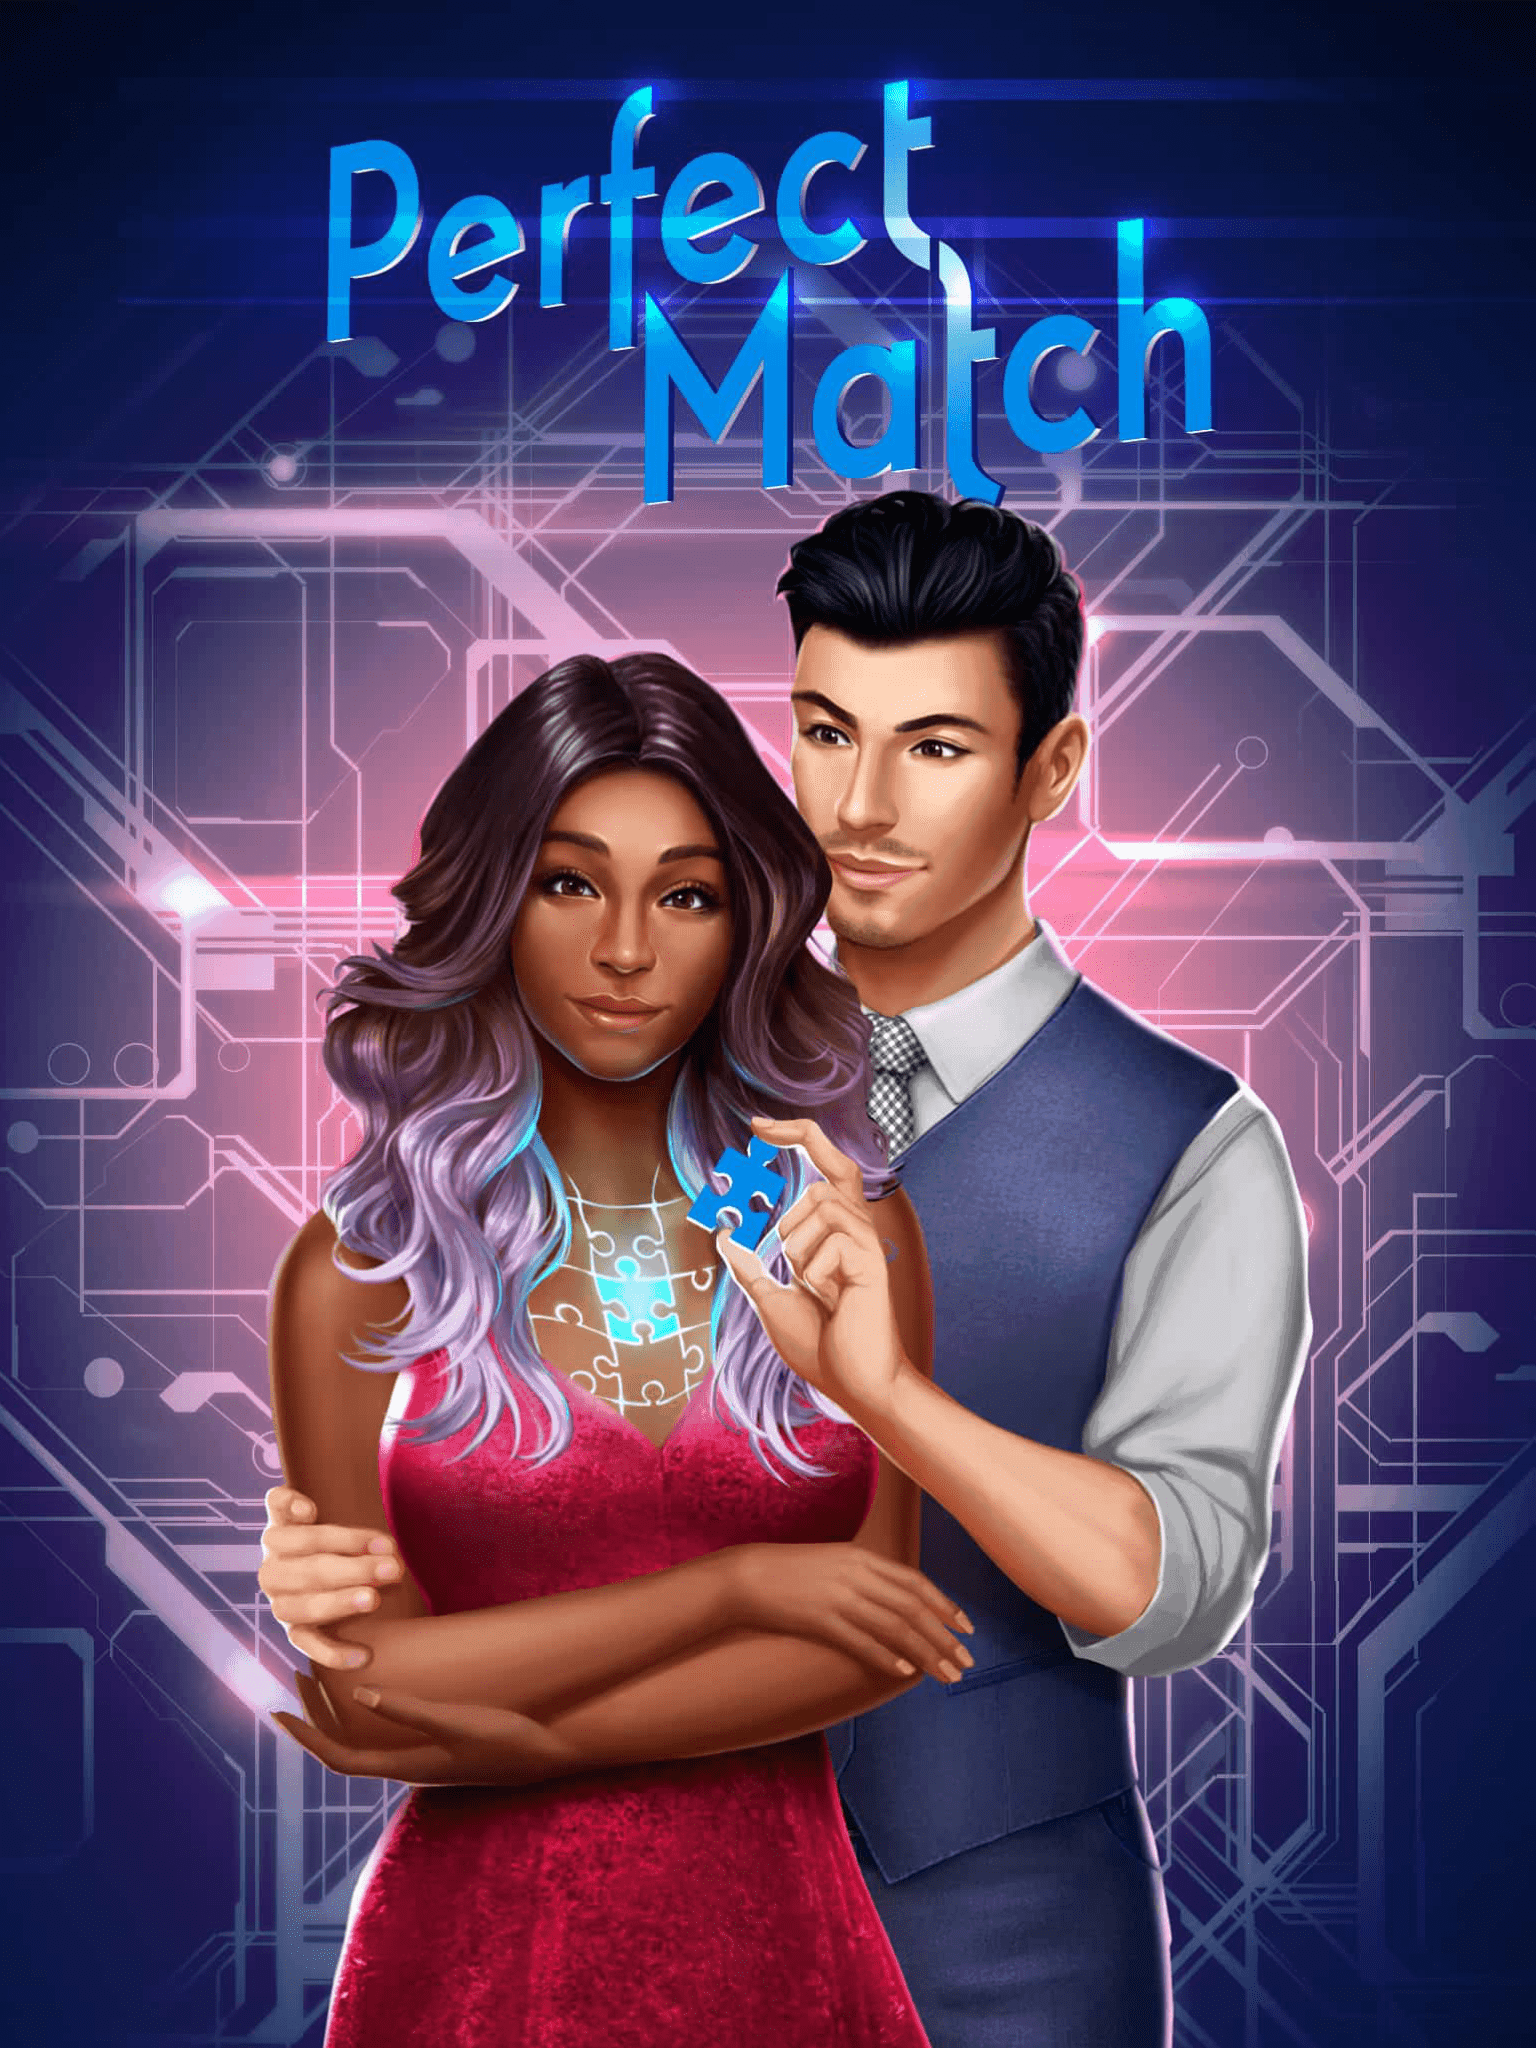 Perfect Match Book 1 Choices Choices Stories You Play Wiki Fandom